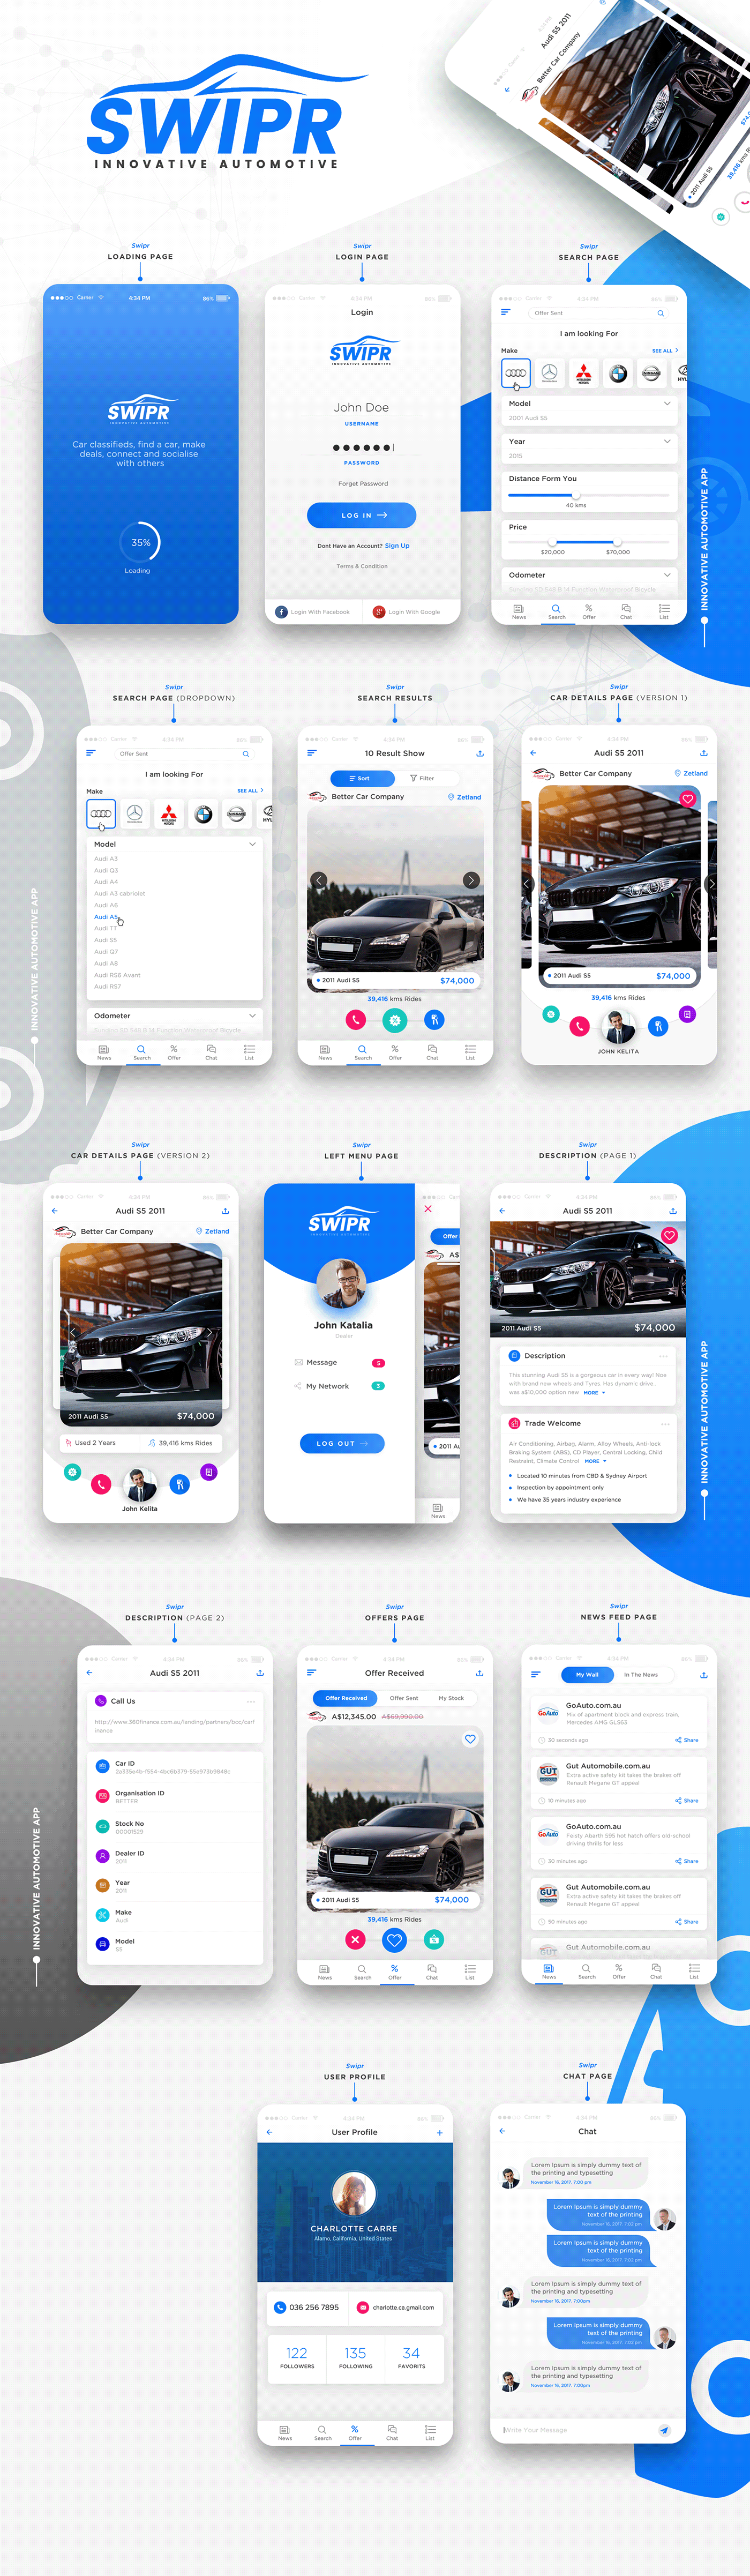 Car Classified USer Registration classified ads Social Networking car deals search cars car news Chat with user Facebook Google login Sort filter cars